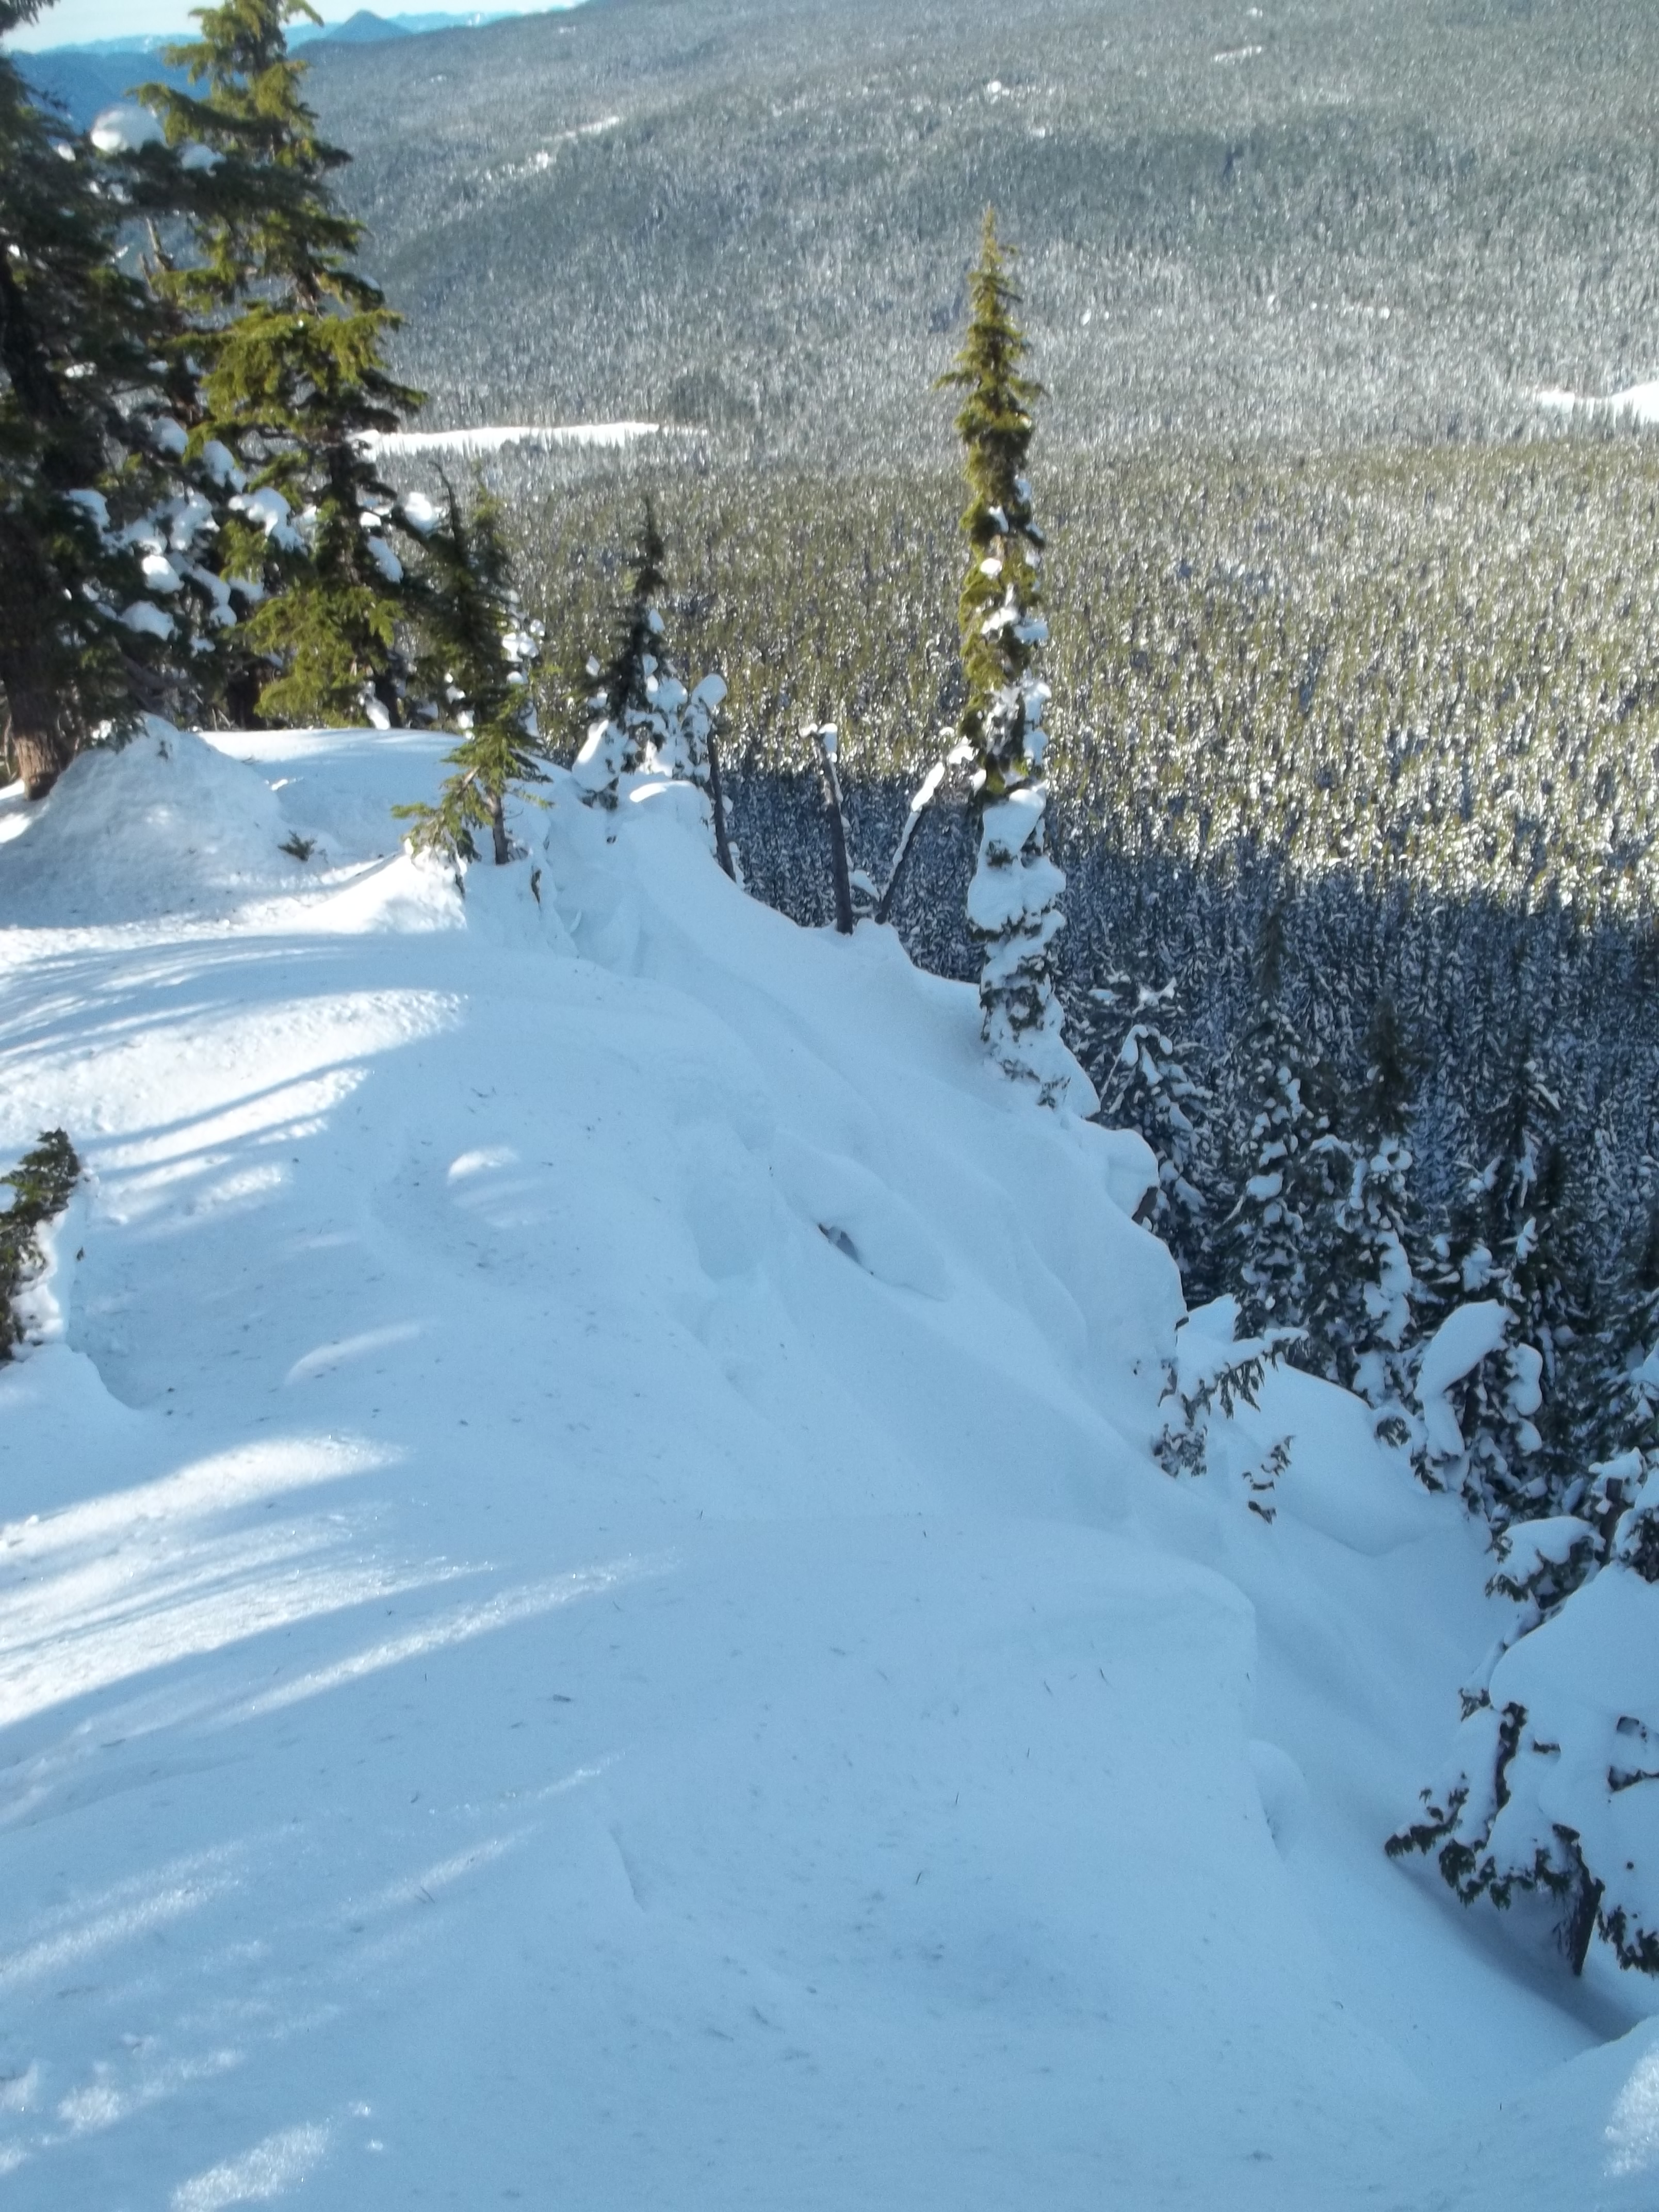 Willamette Pass Backcountry. Let's hope El Nino can do this for Oregon this winter.